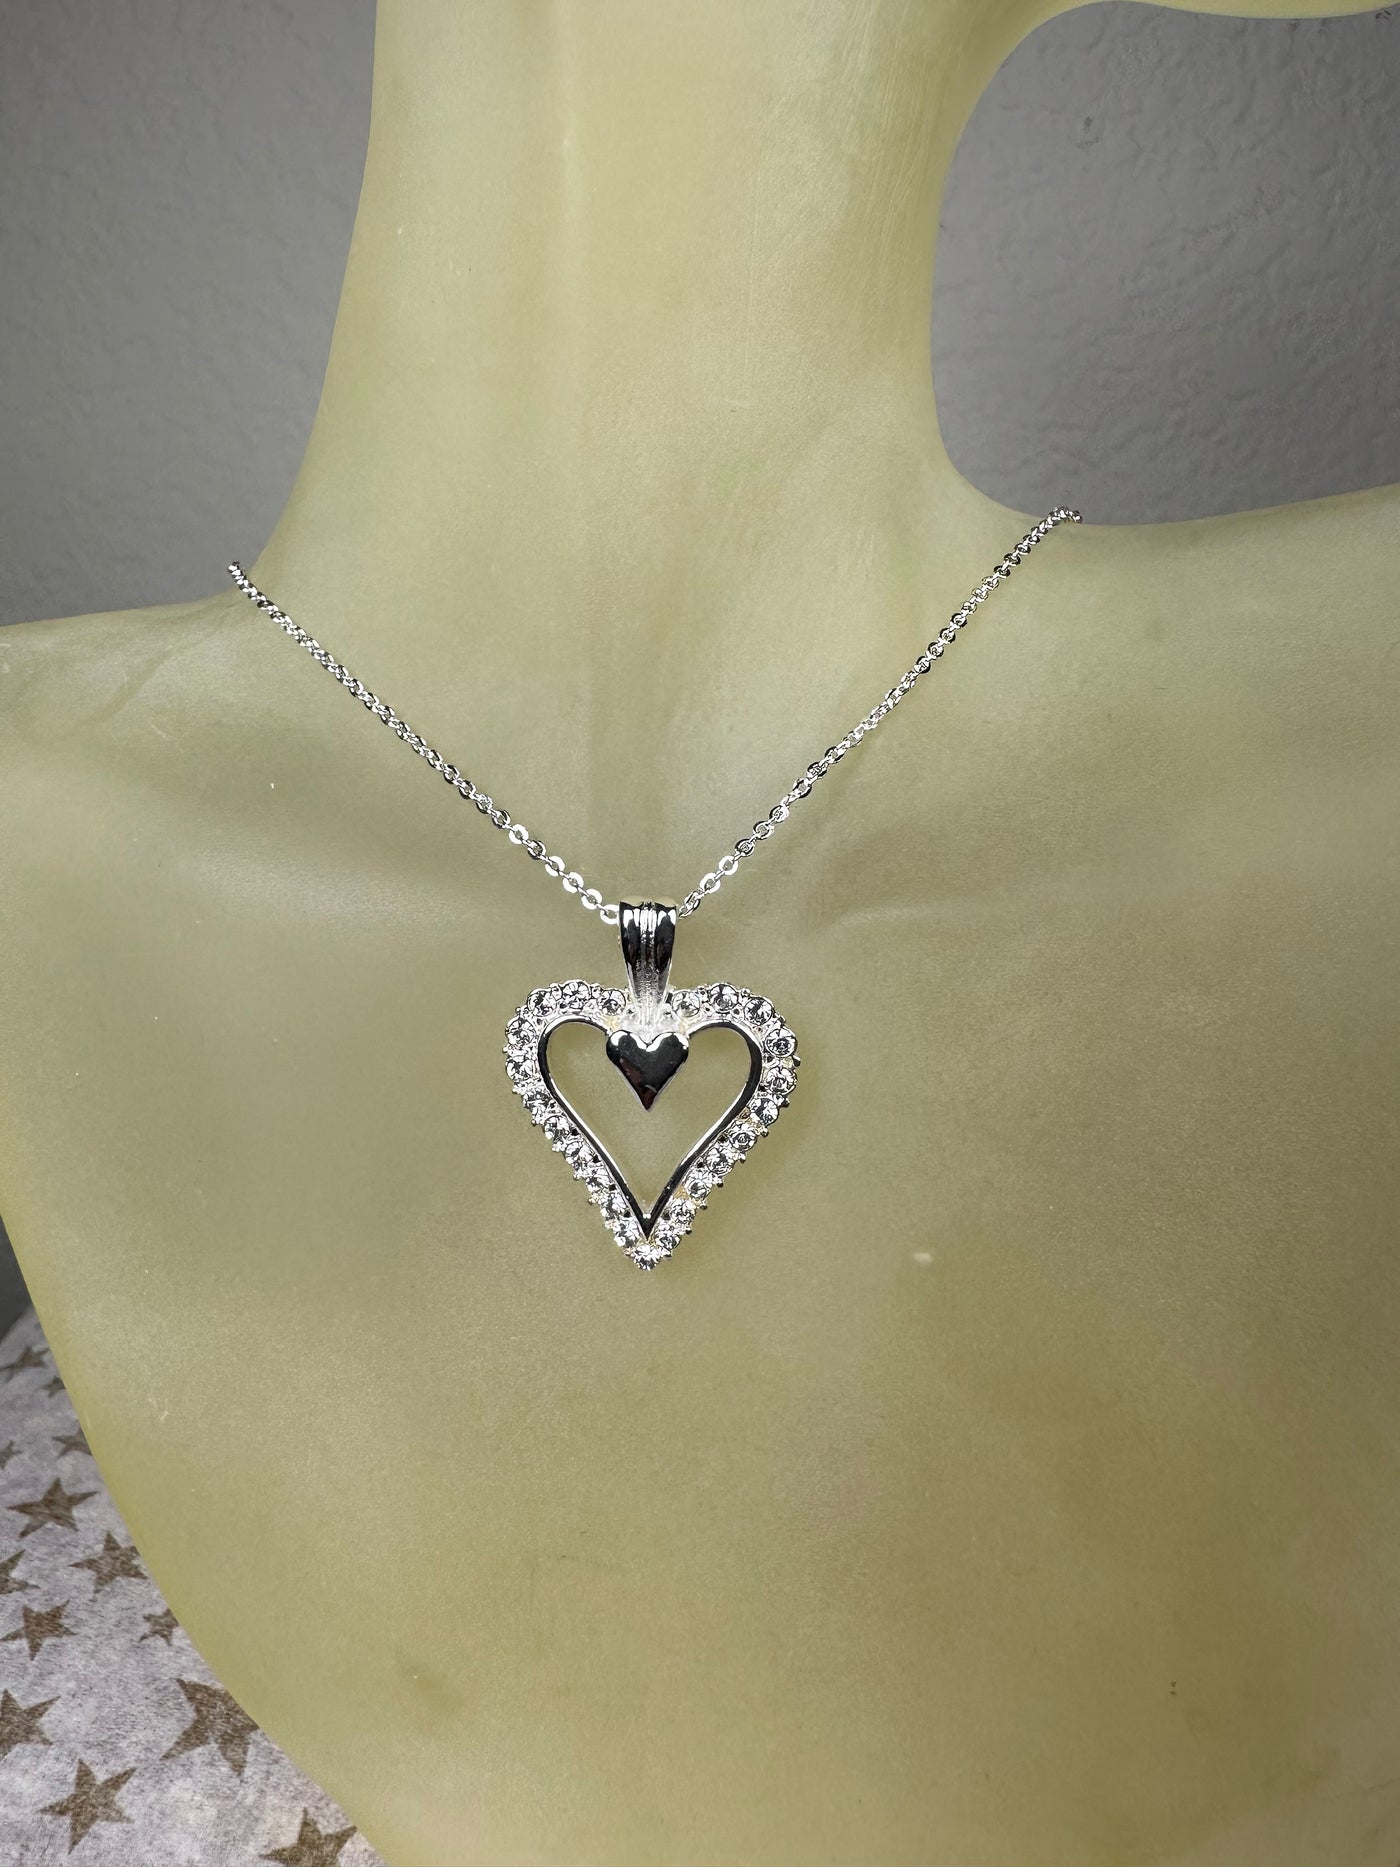 Silver Tone Crystal Heart Pendant and Chain Necklace